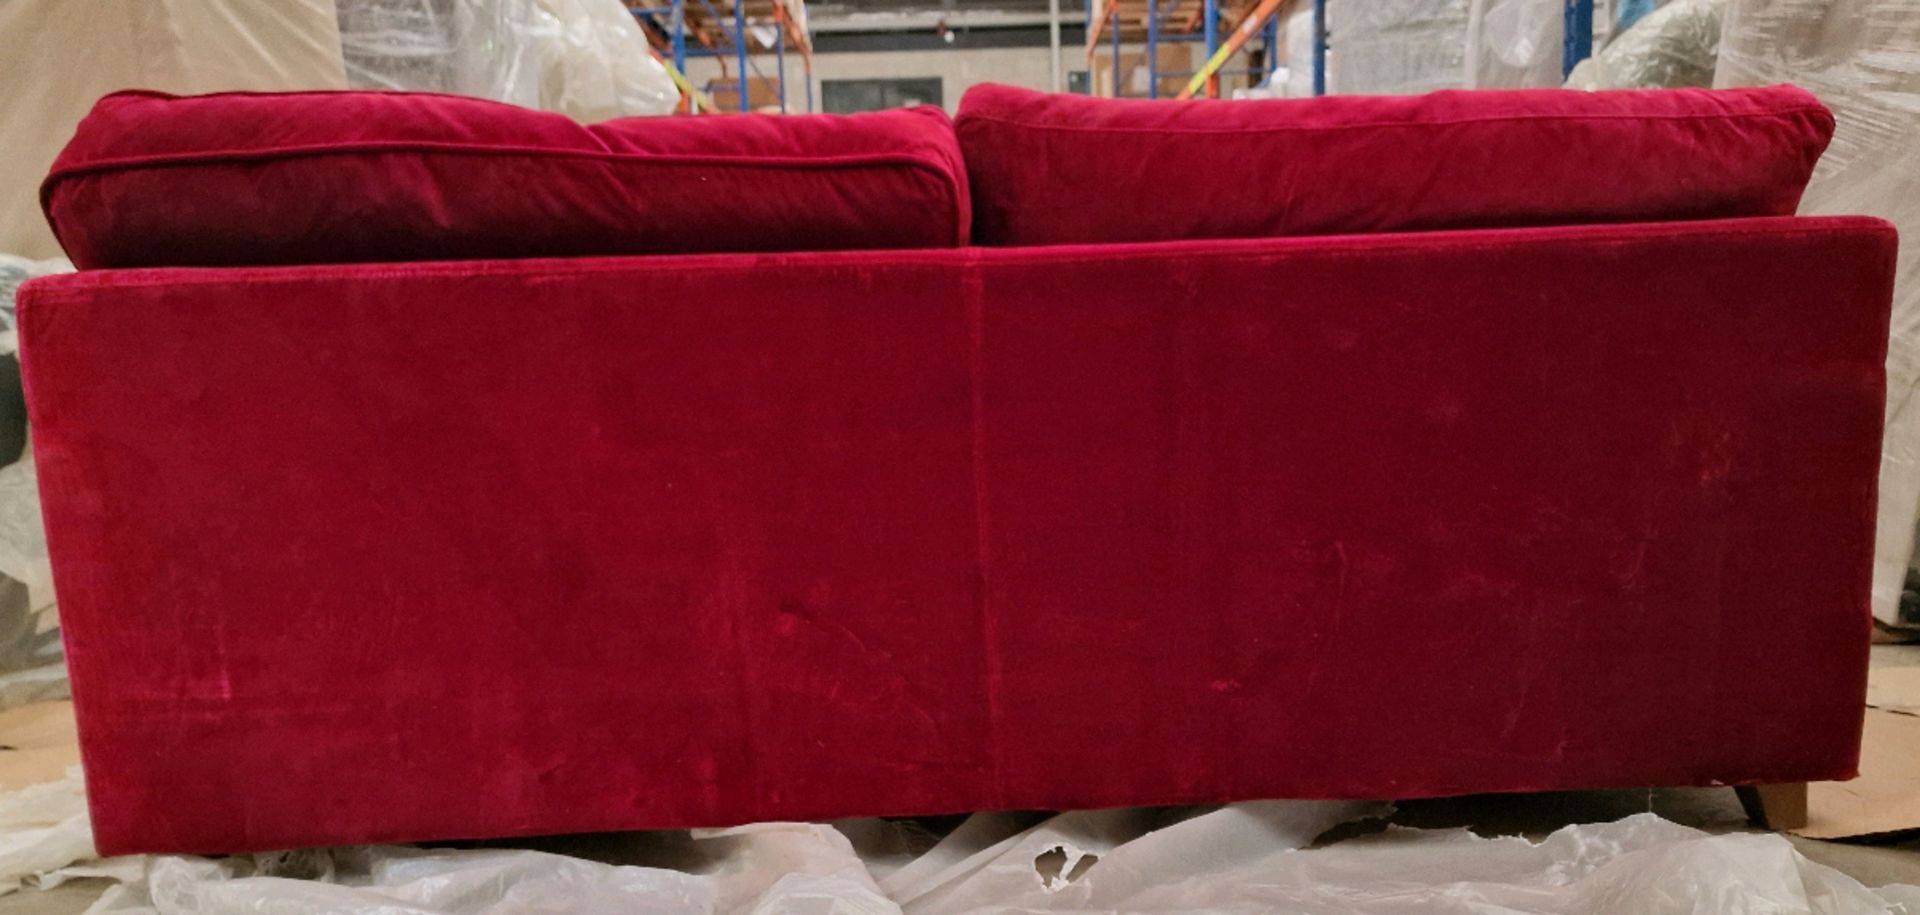 Crushed velvet red 4 seater sofa bed - Image 6 of 10